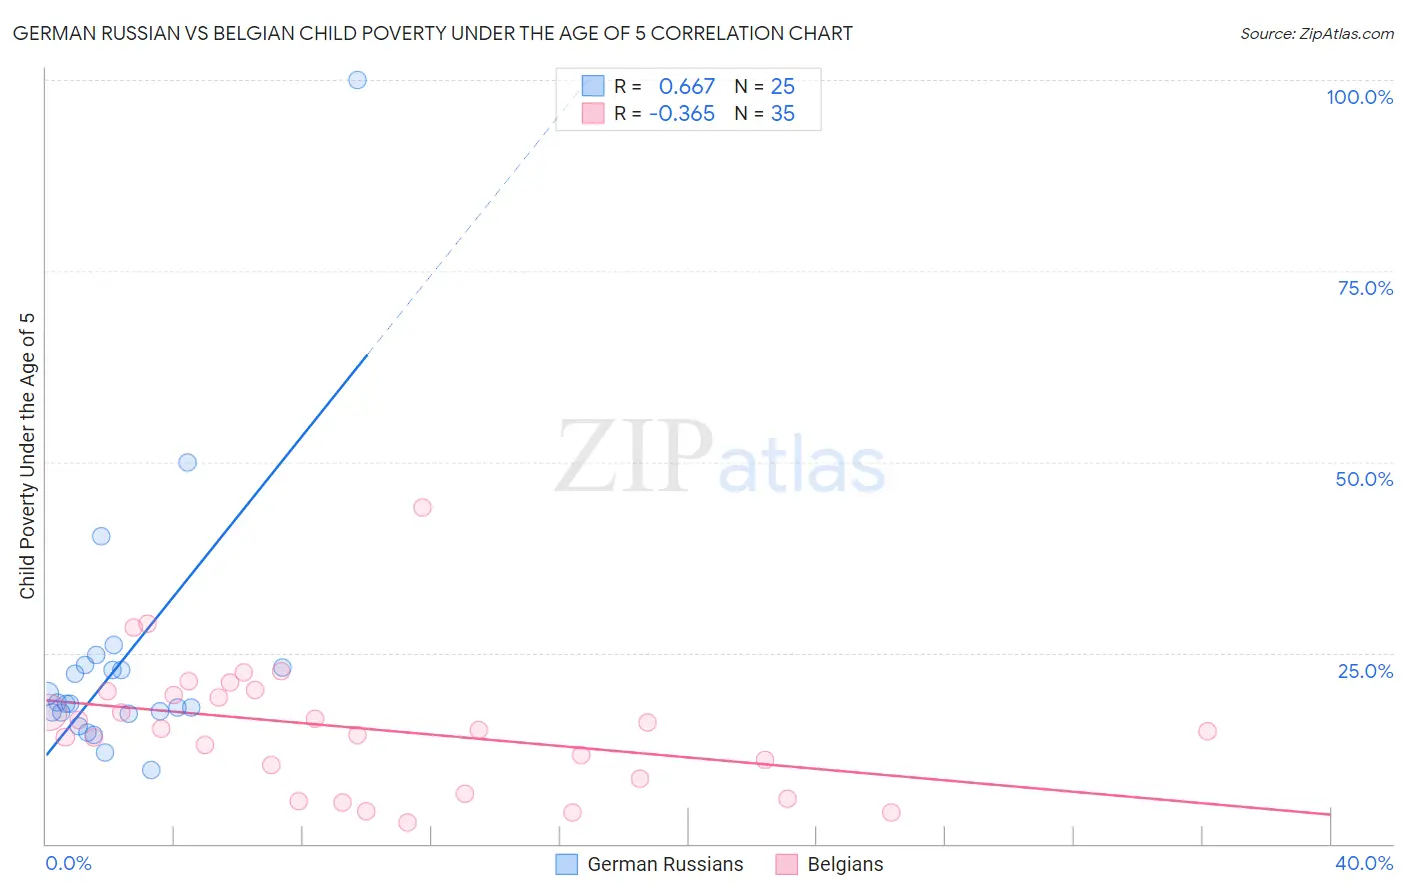 German Russian vs Belgian Child Poverty Under the Age of 5